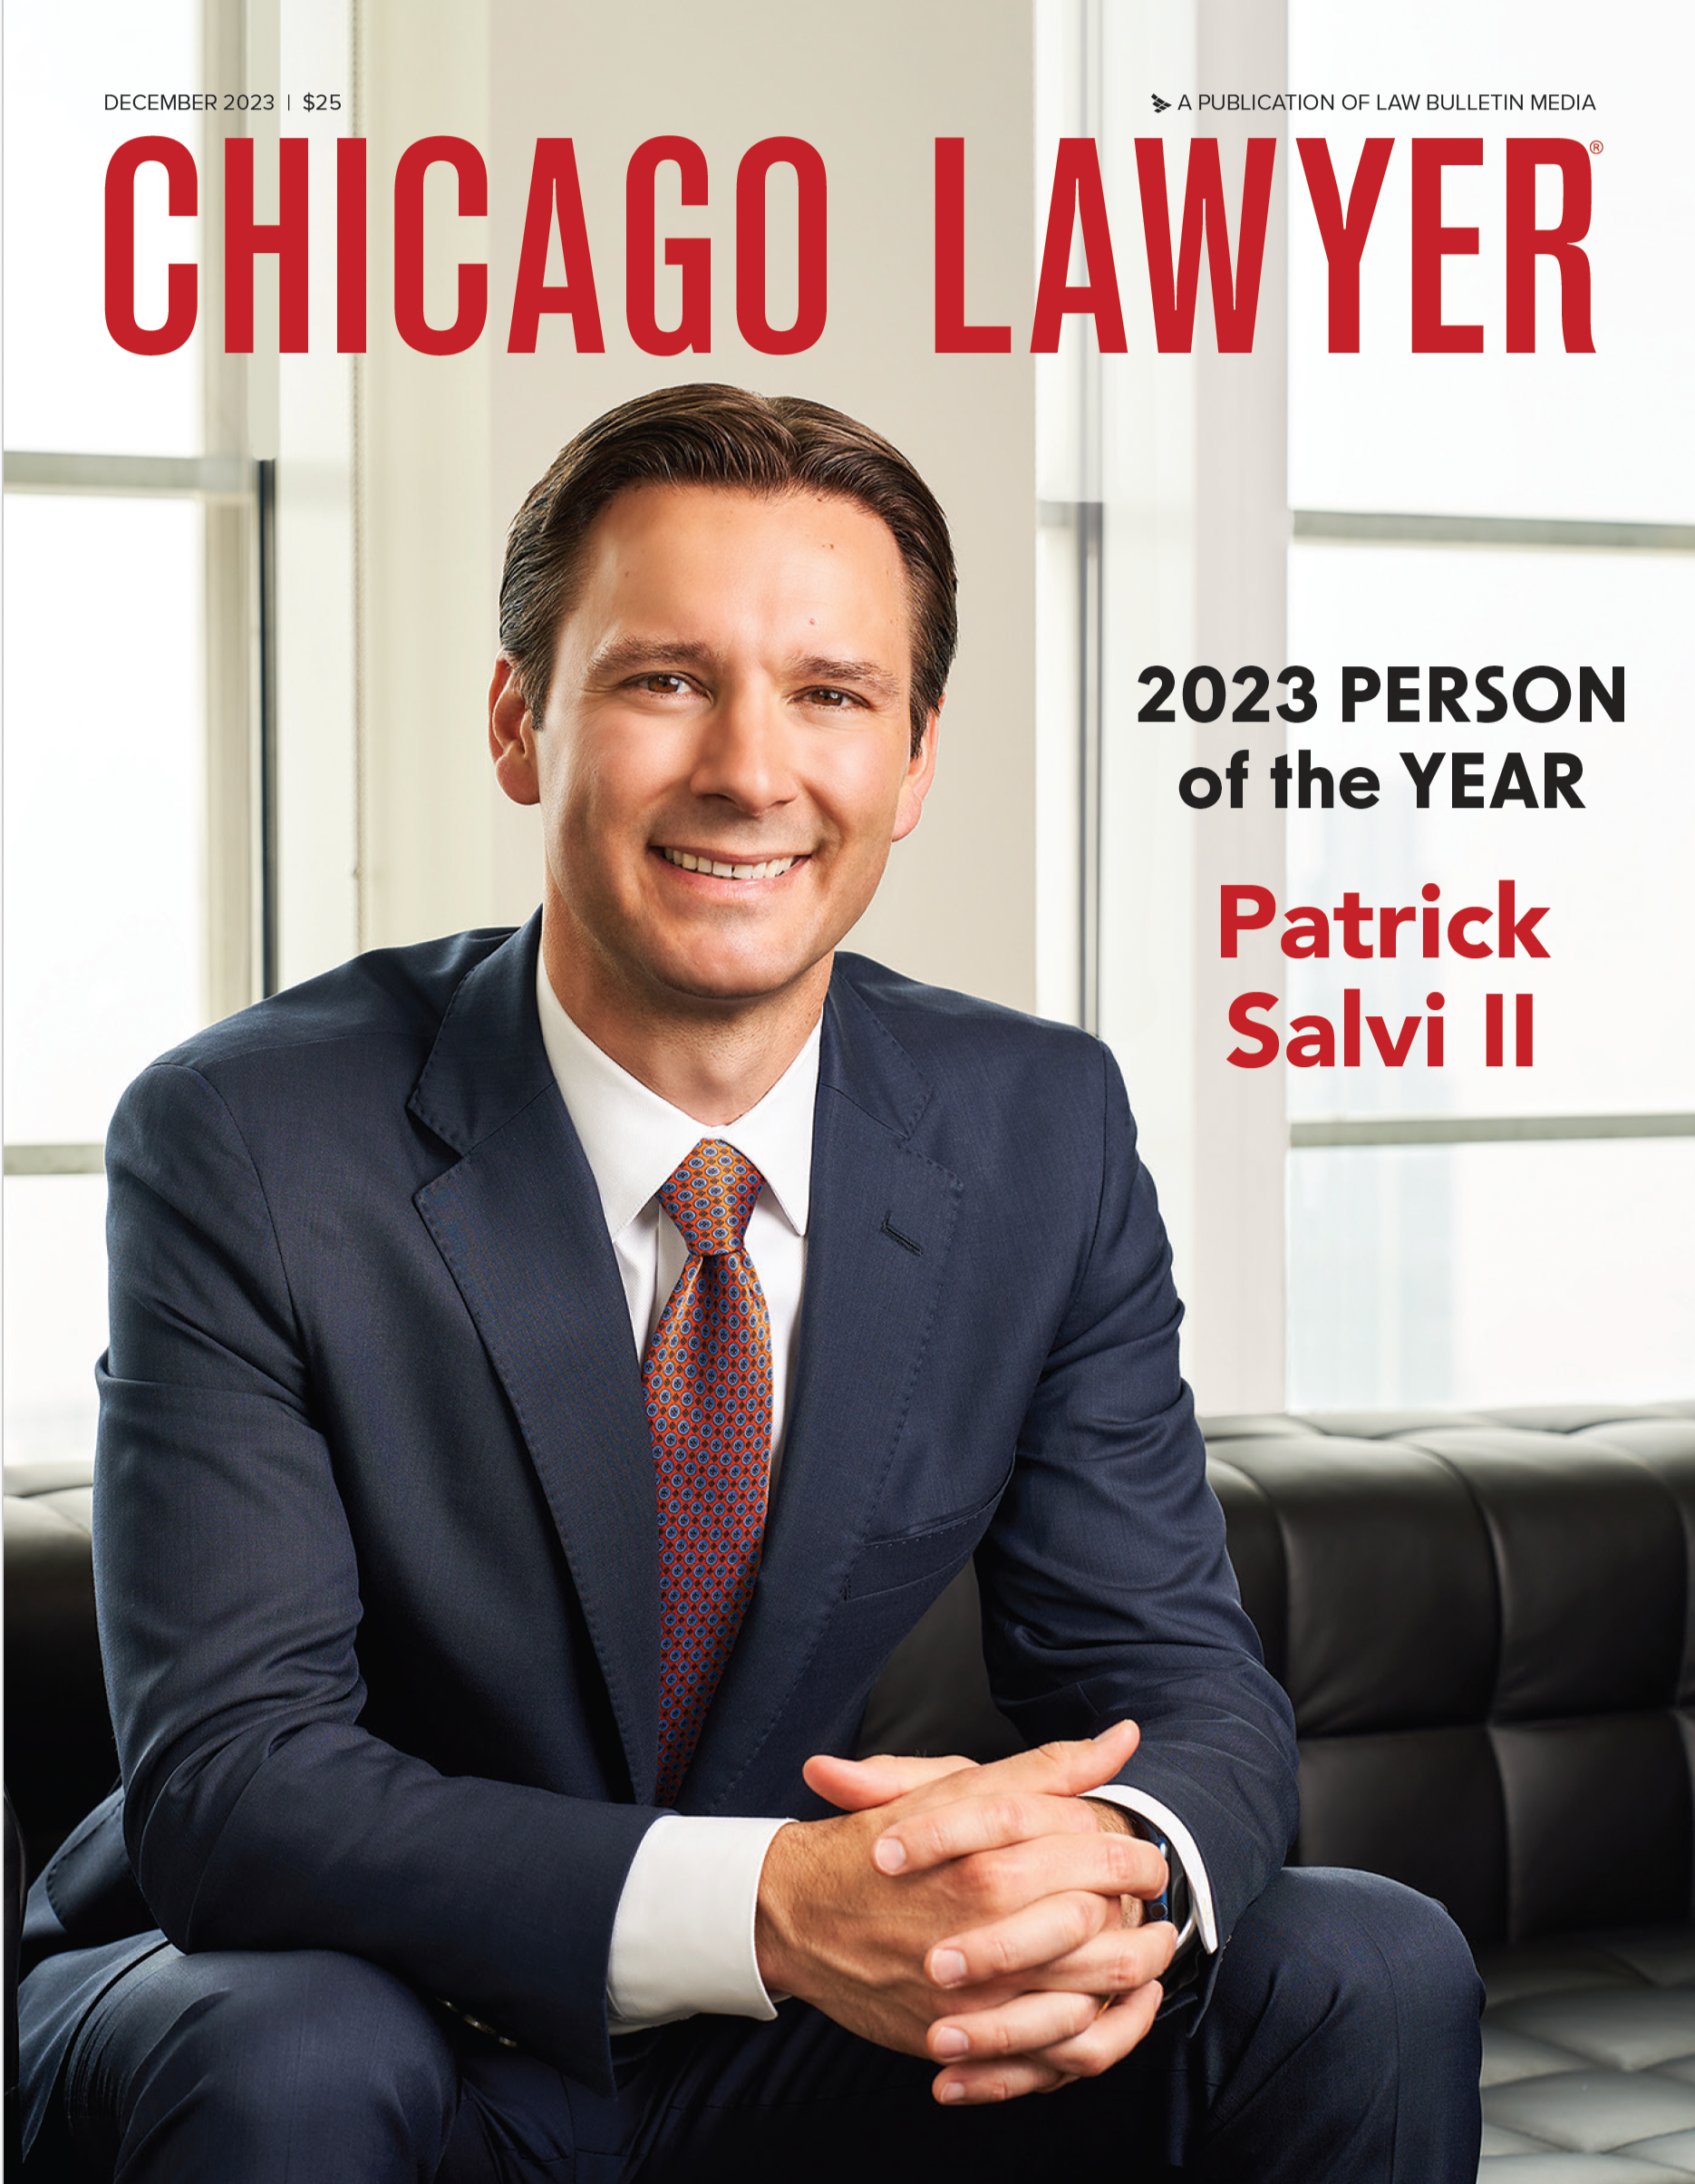 Patrick A. Salvi II named by Chicago Lawyer the 2023 Person of the Year and featured on their cover.